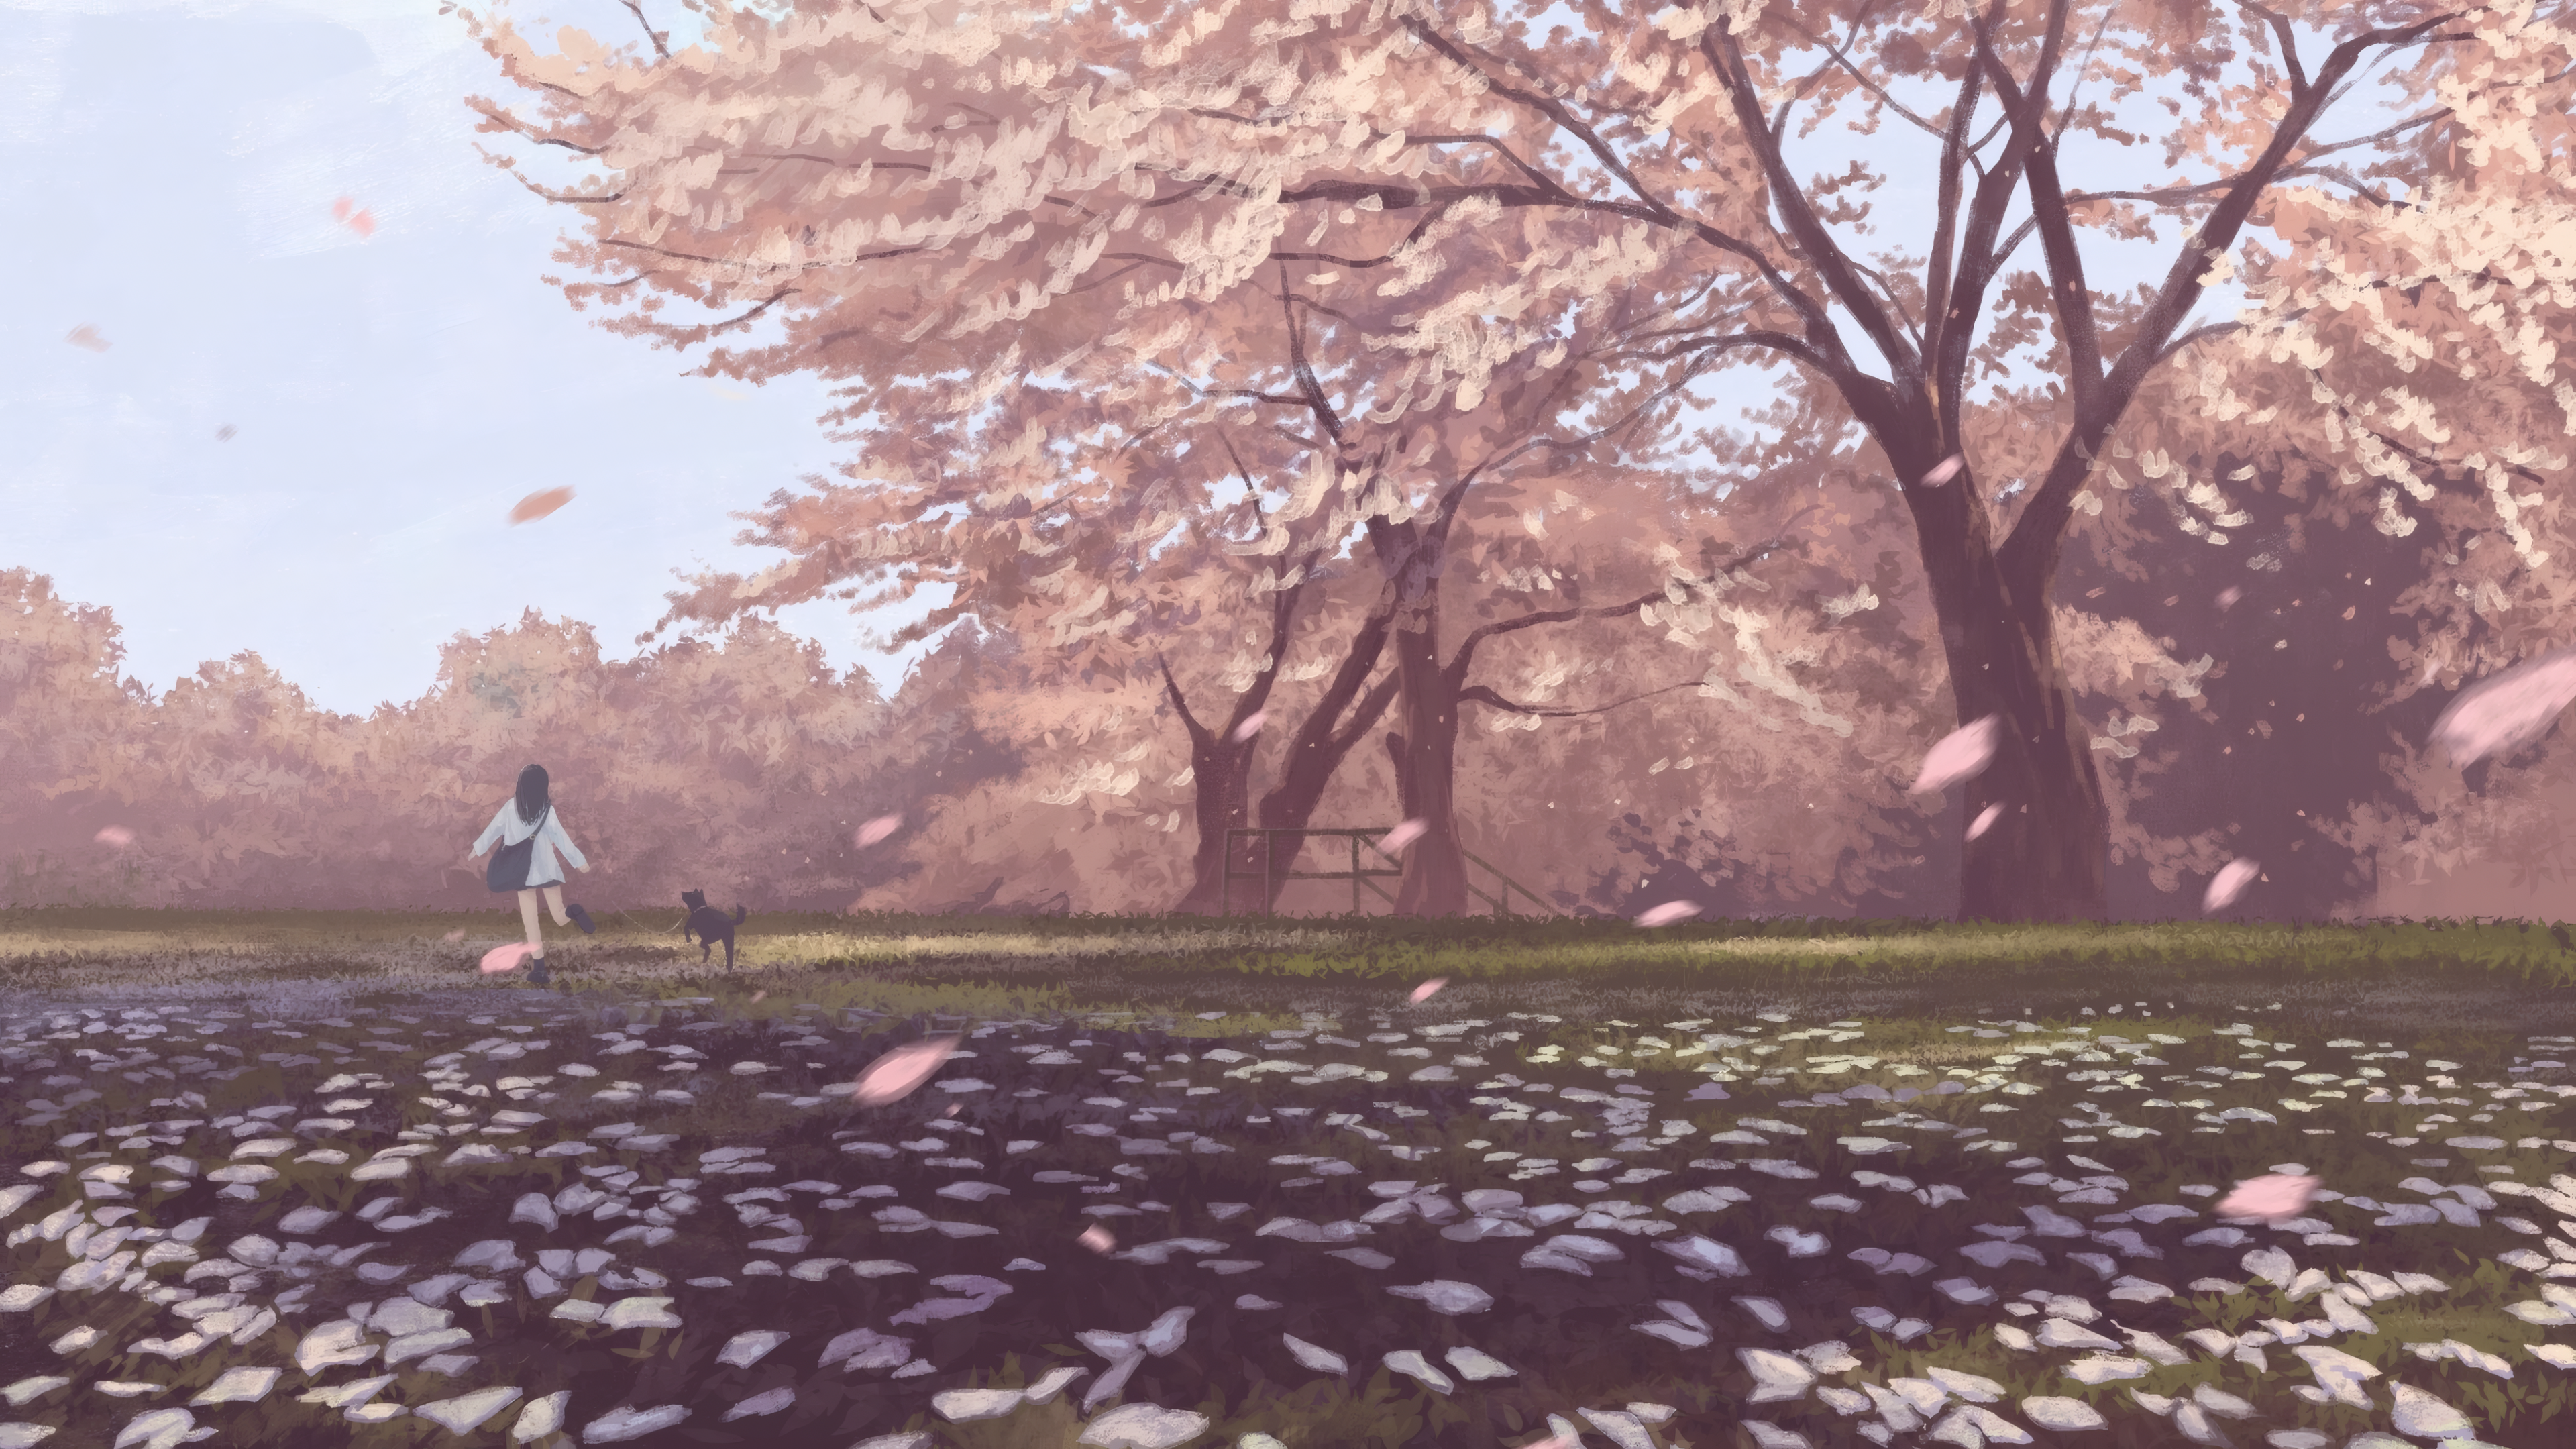 General 3840x2160 genskc dog trees forest clearing digital art artwork cherry trees cherry blossom